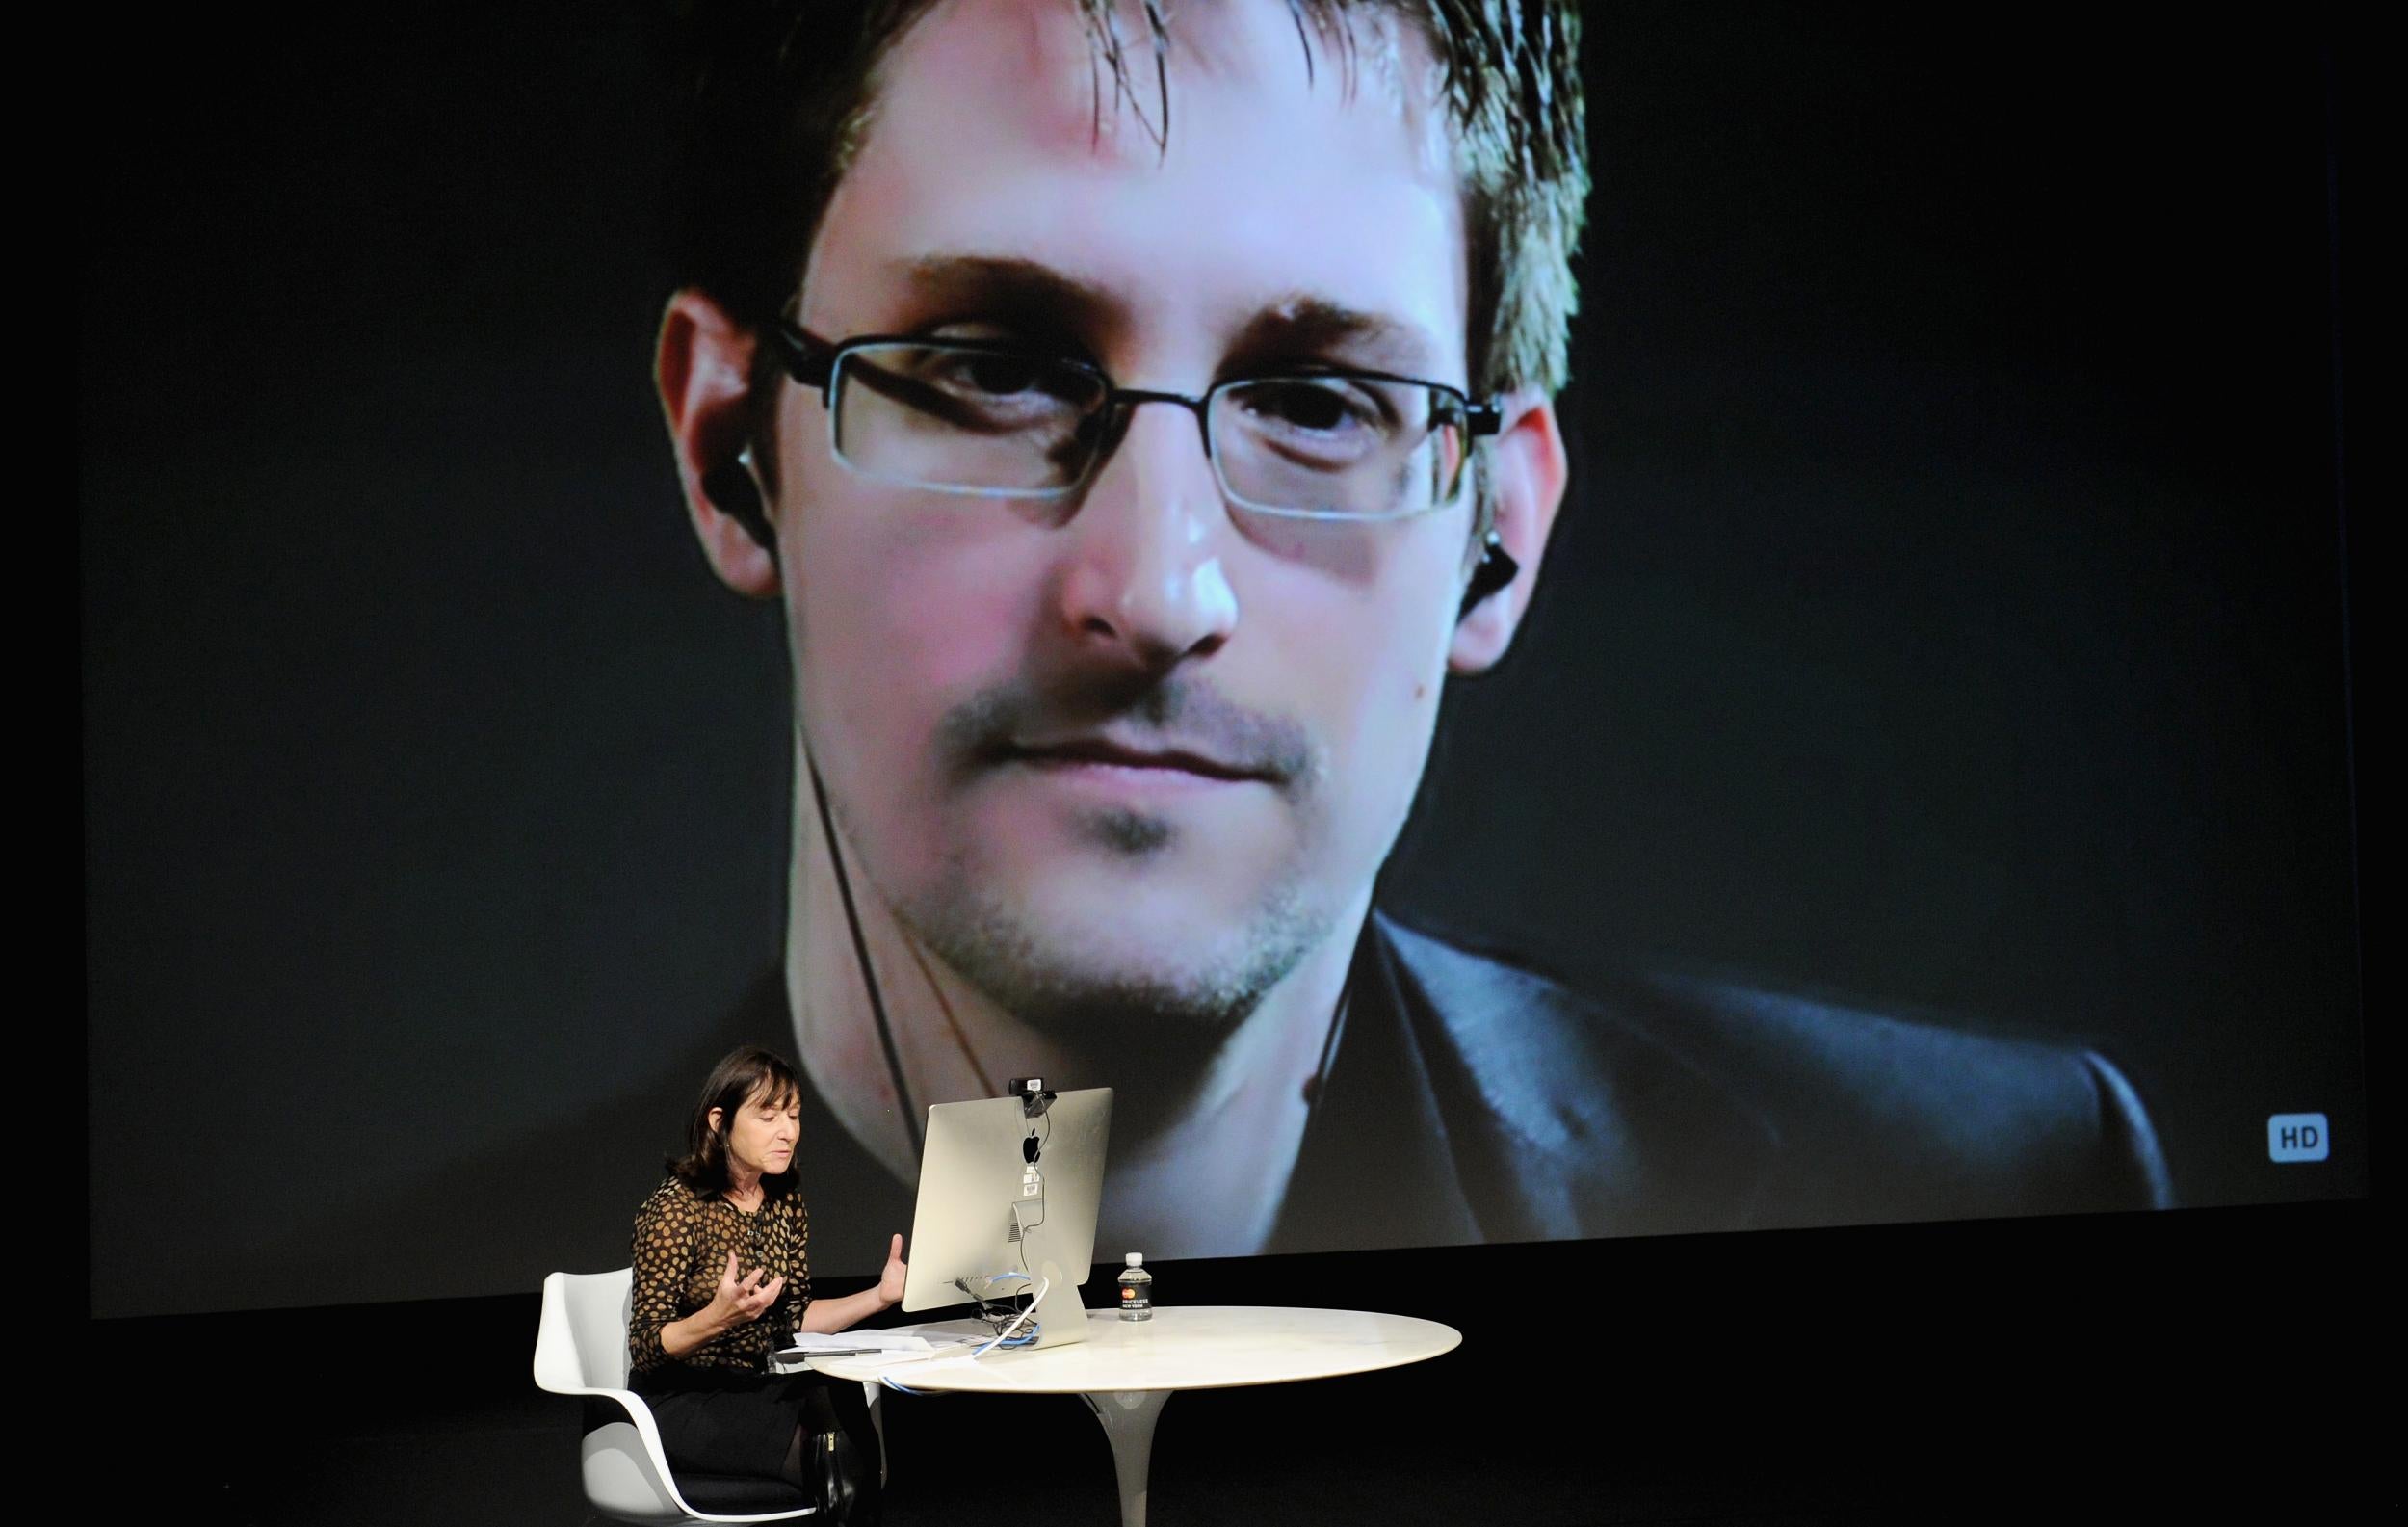 Edward Snowden is interviewed by Jane Mayer during The New Yorker Festival in 2014